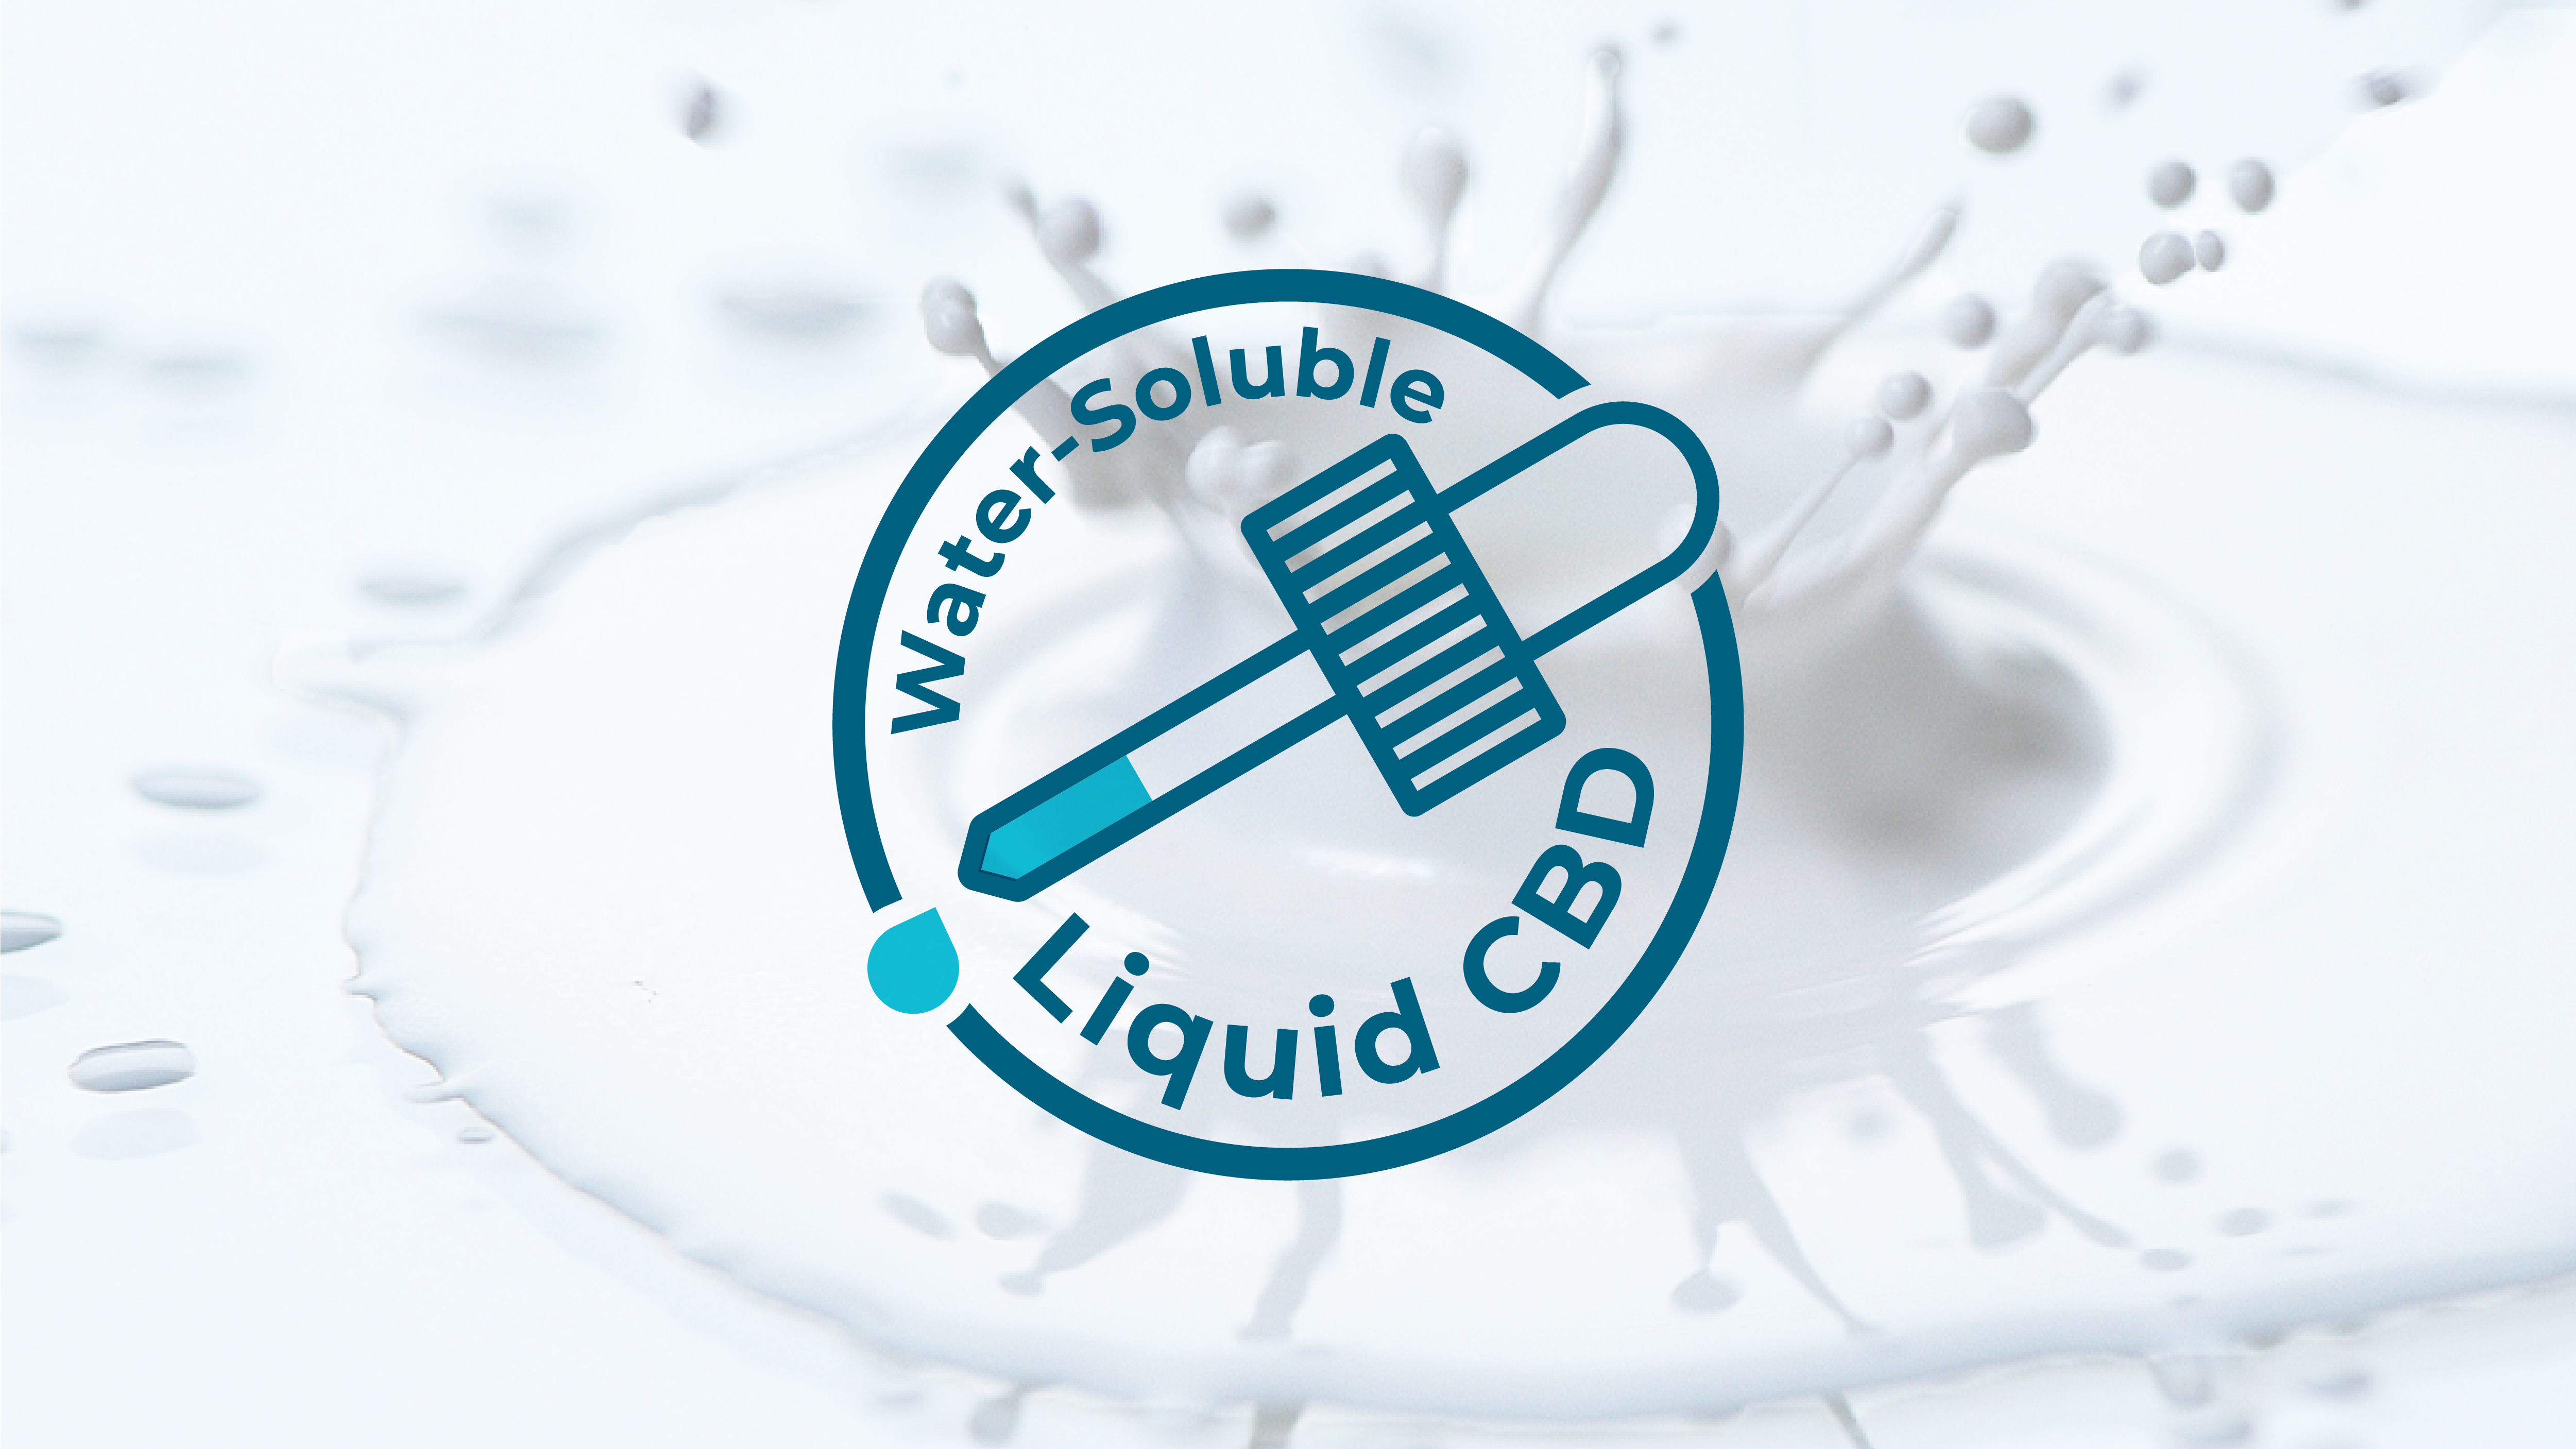 This is an image that represent Water Soluble Liquid CBD. A custom logo with this statement is overlaying an image of CBD splashing as liquid in the background.